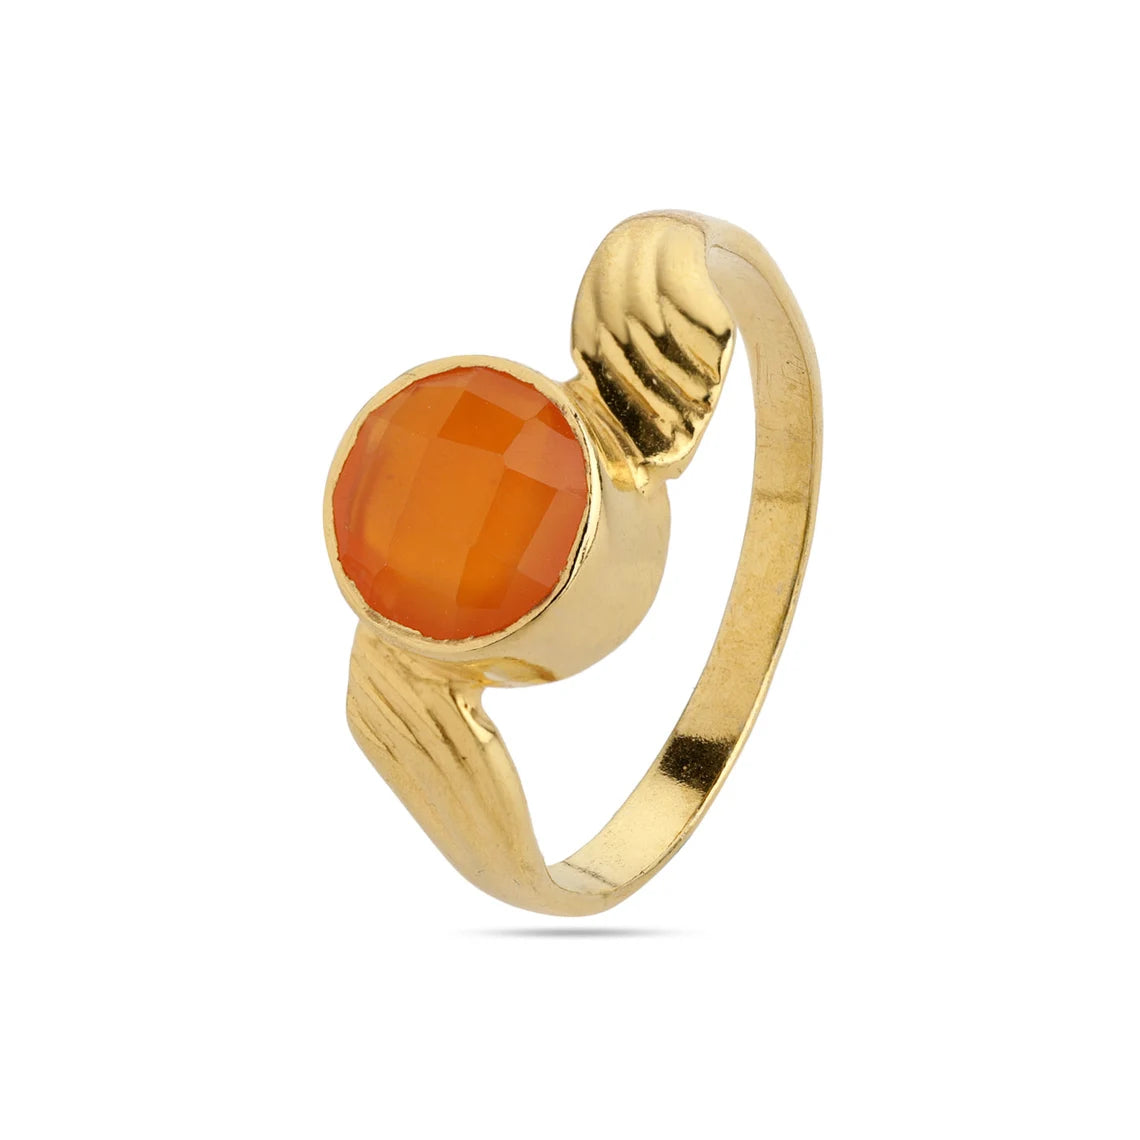 Carnelian Gemstone Ring, Sterling Silver Ring, Gold Plated Ring, Round Carnelian Ring, Handmade Ring, Statement Ring, August Birthstone Ring